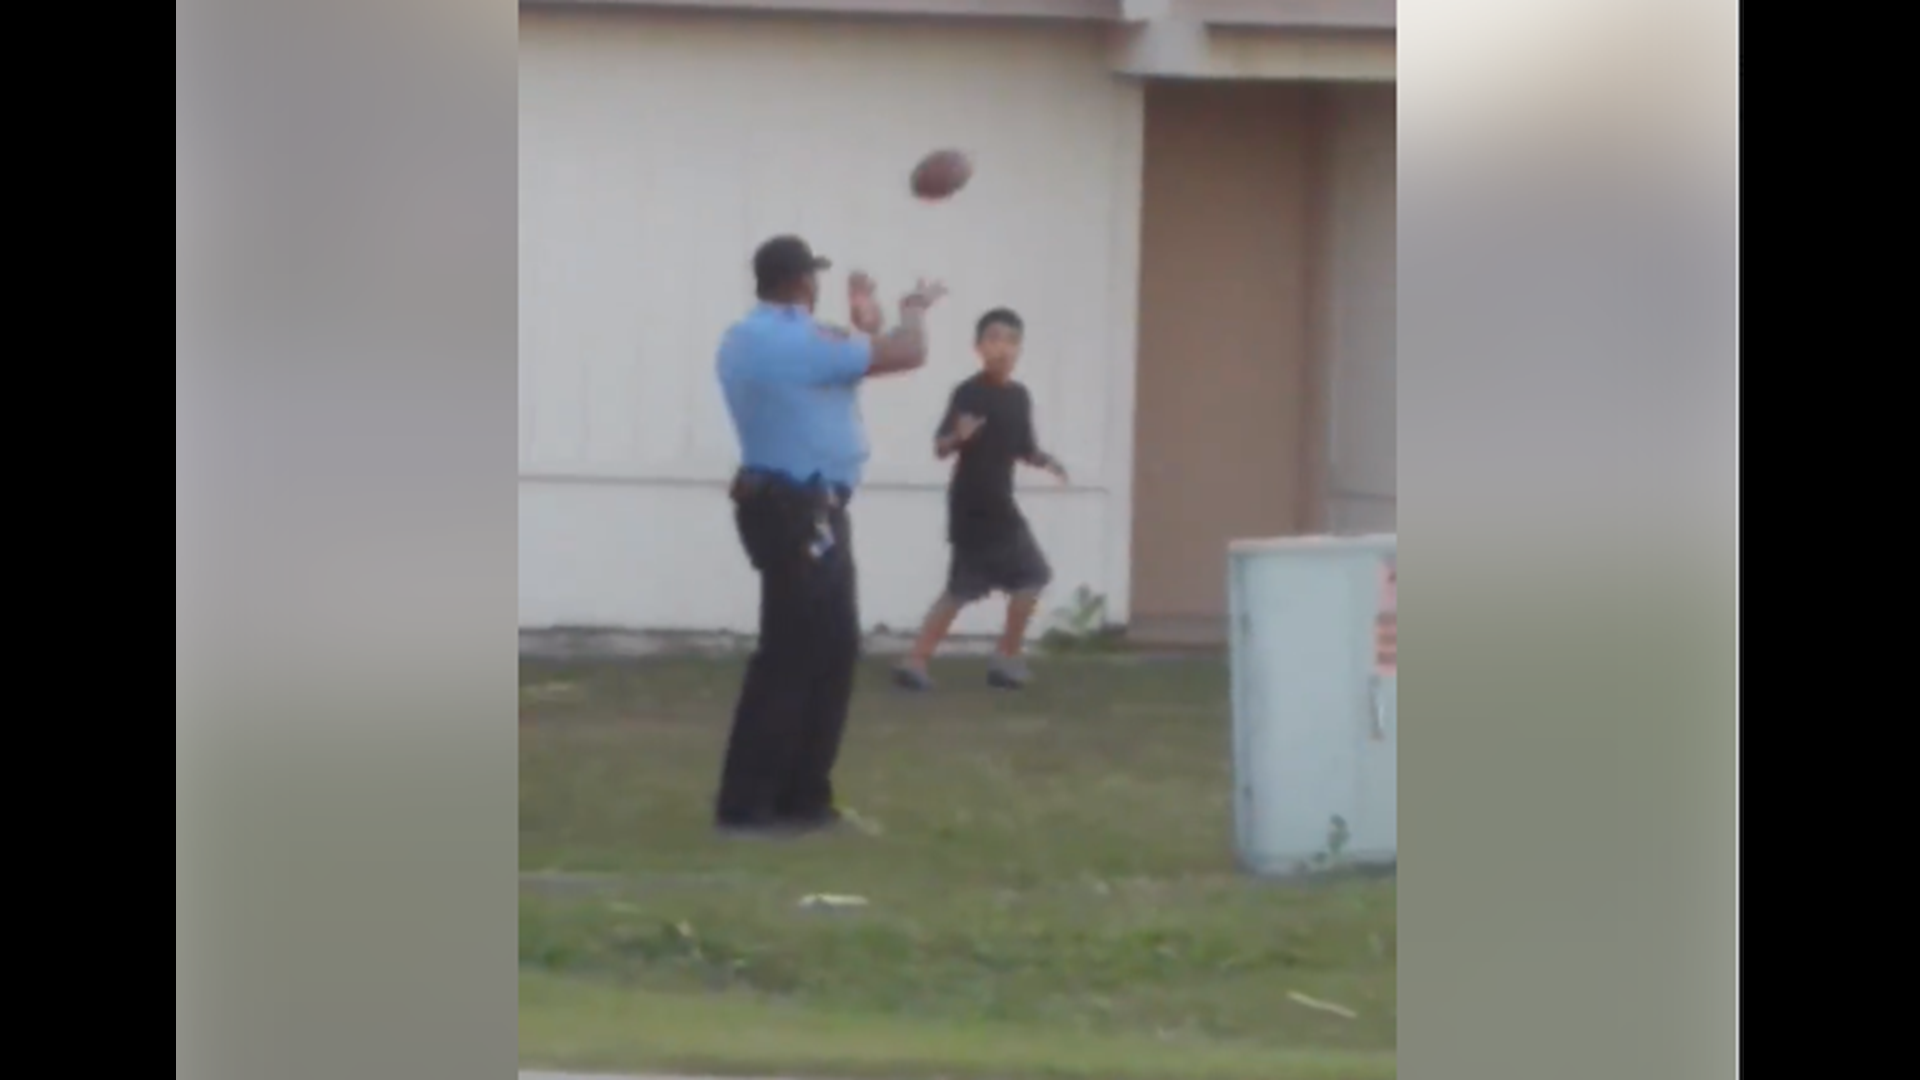 "I was on my way home when I noticed one of Kingsland, Police Officers playing a friendly game of football with some teens. This right here put a smile on my face, and yes I had to make a u-turn to capture this moment." - (Video provided by Pearl Stephen for First Coast News)